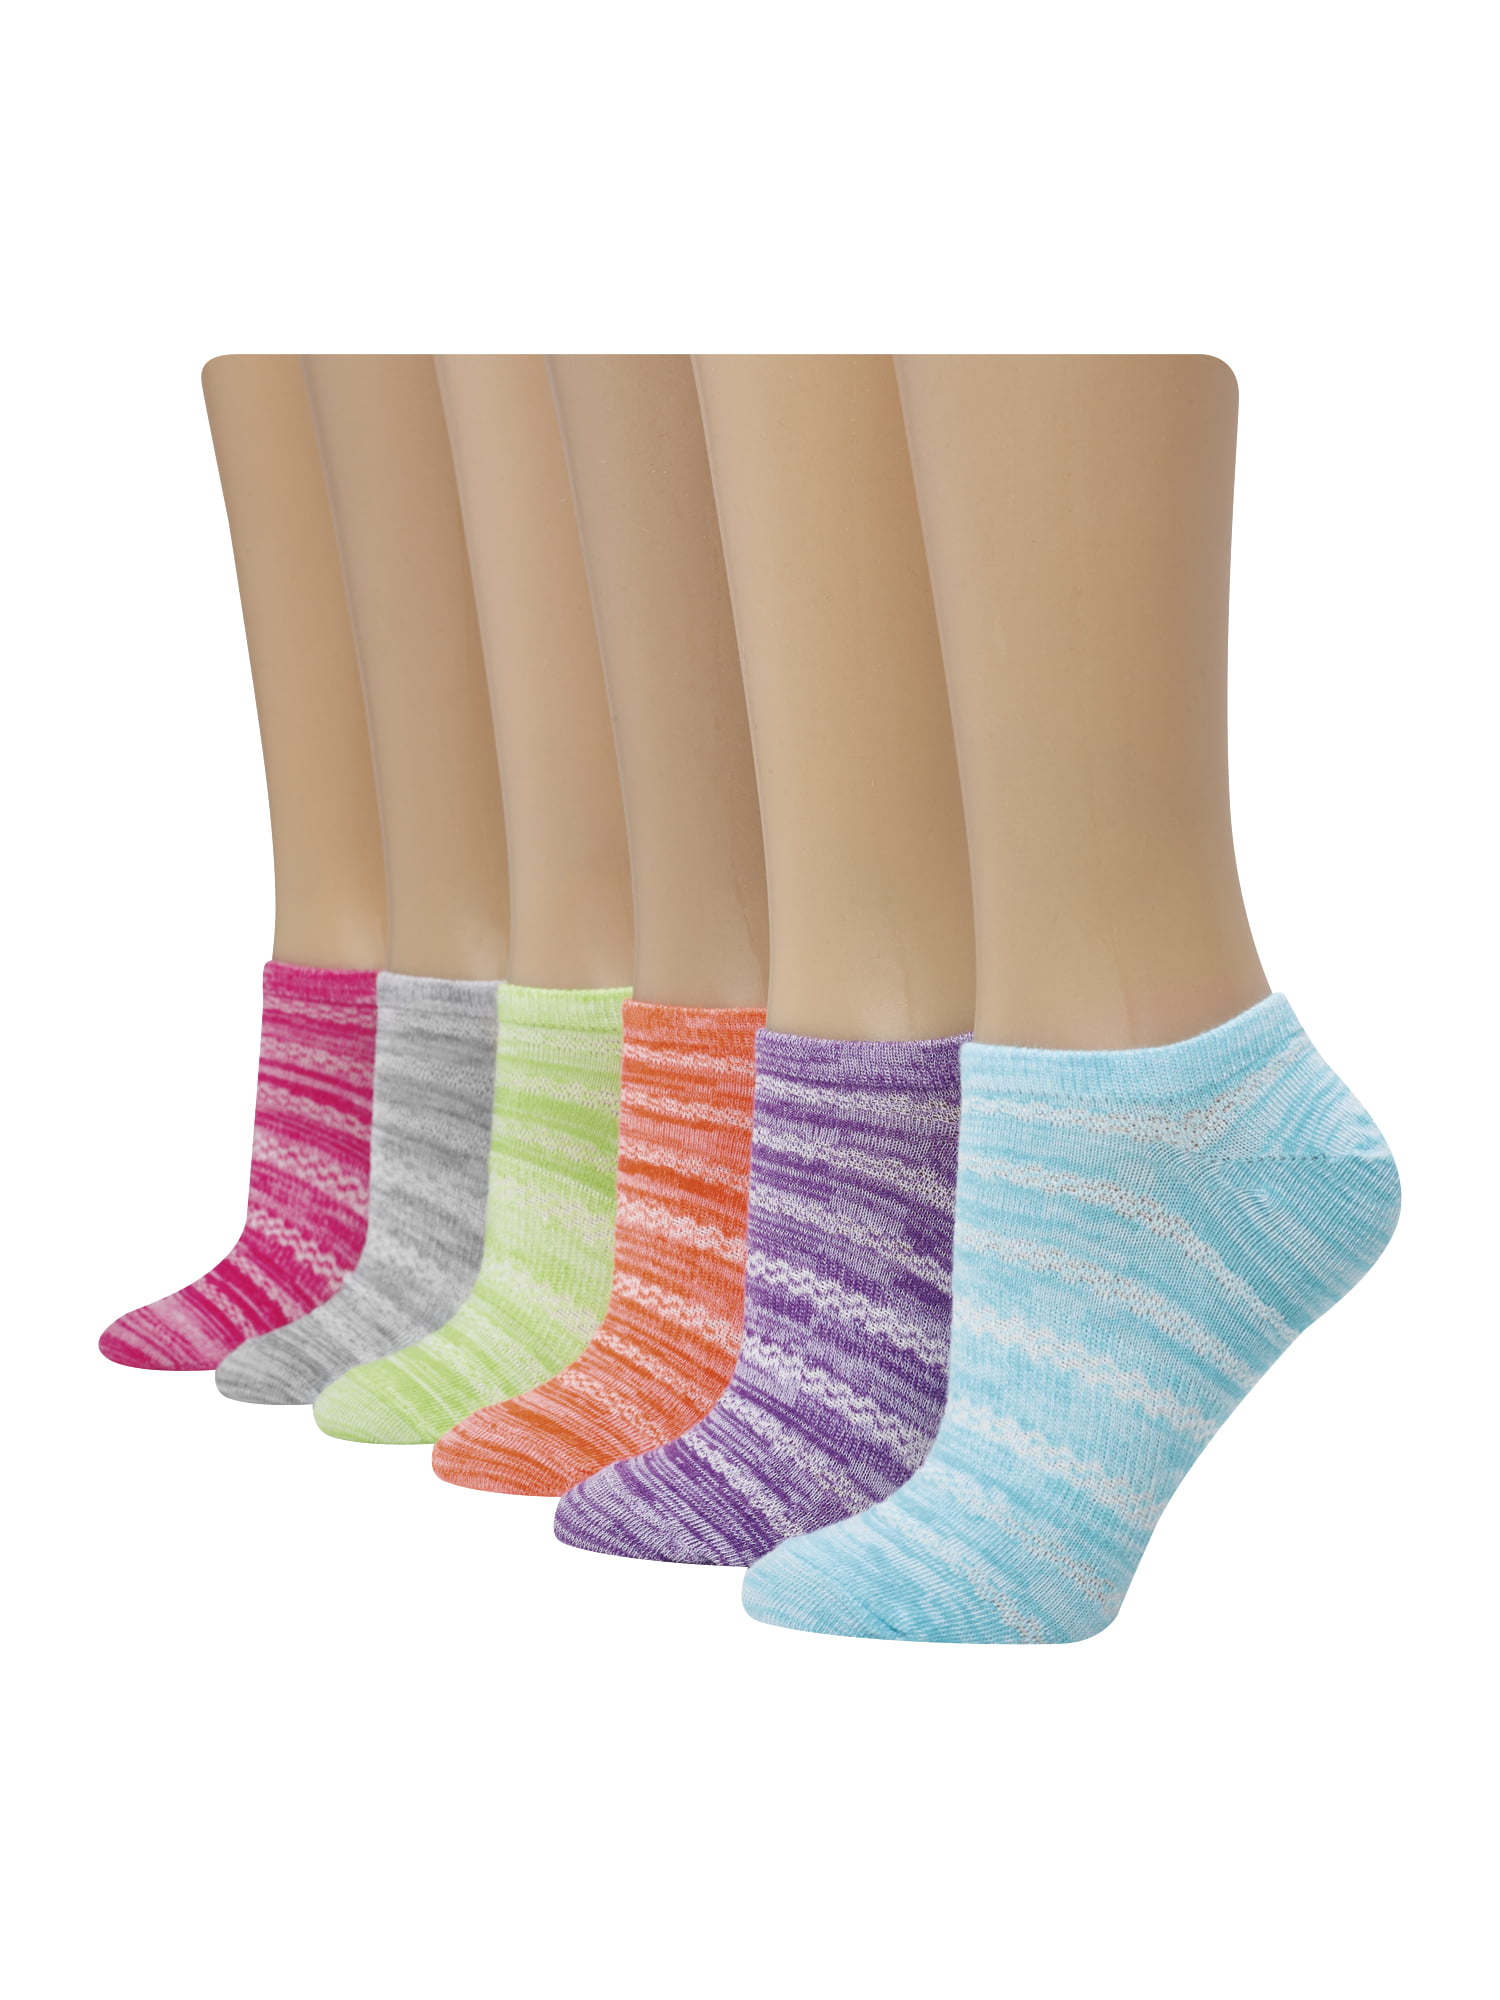 Assorted Ladies Socks Various Designs Soft High Quality Womans Size 4-7